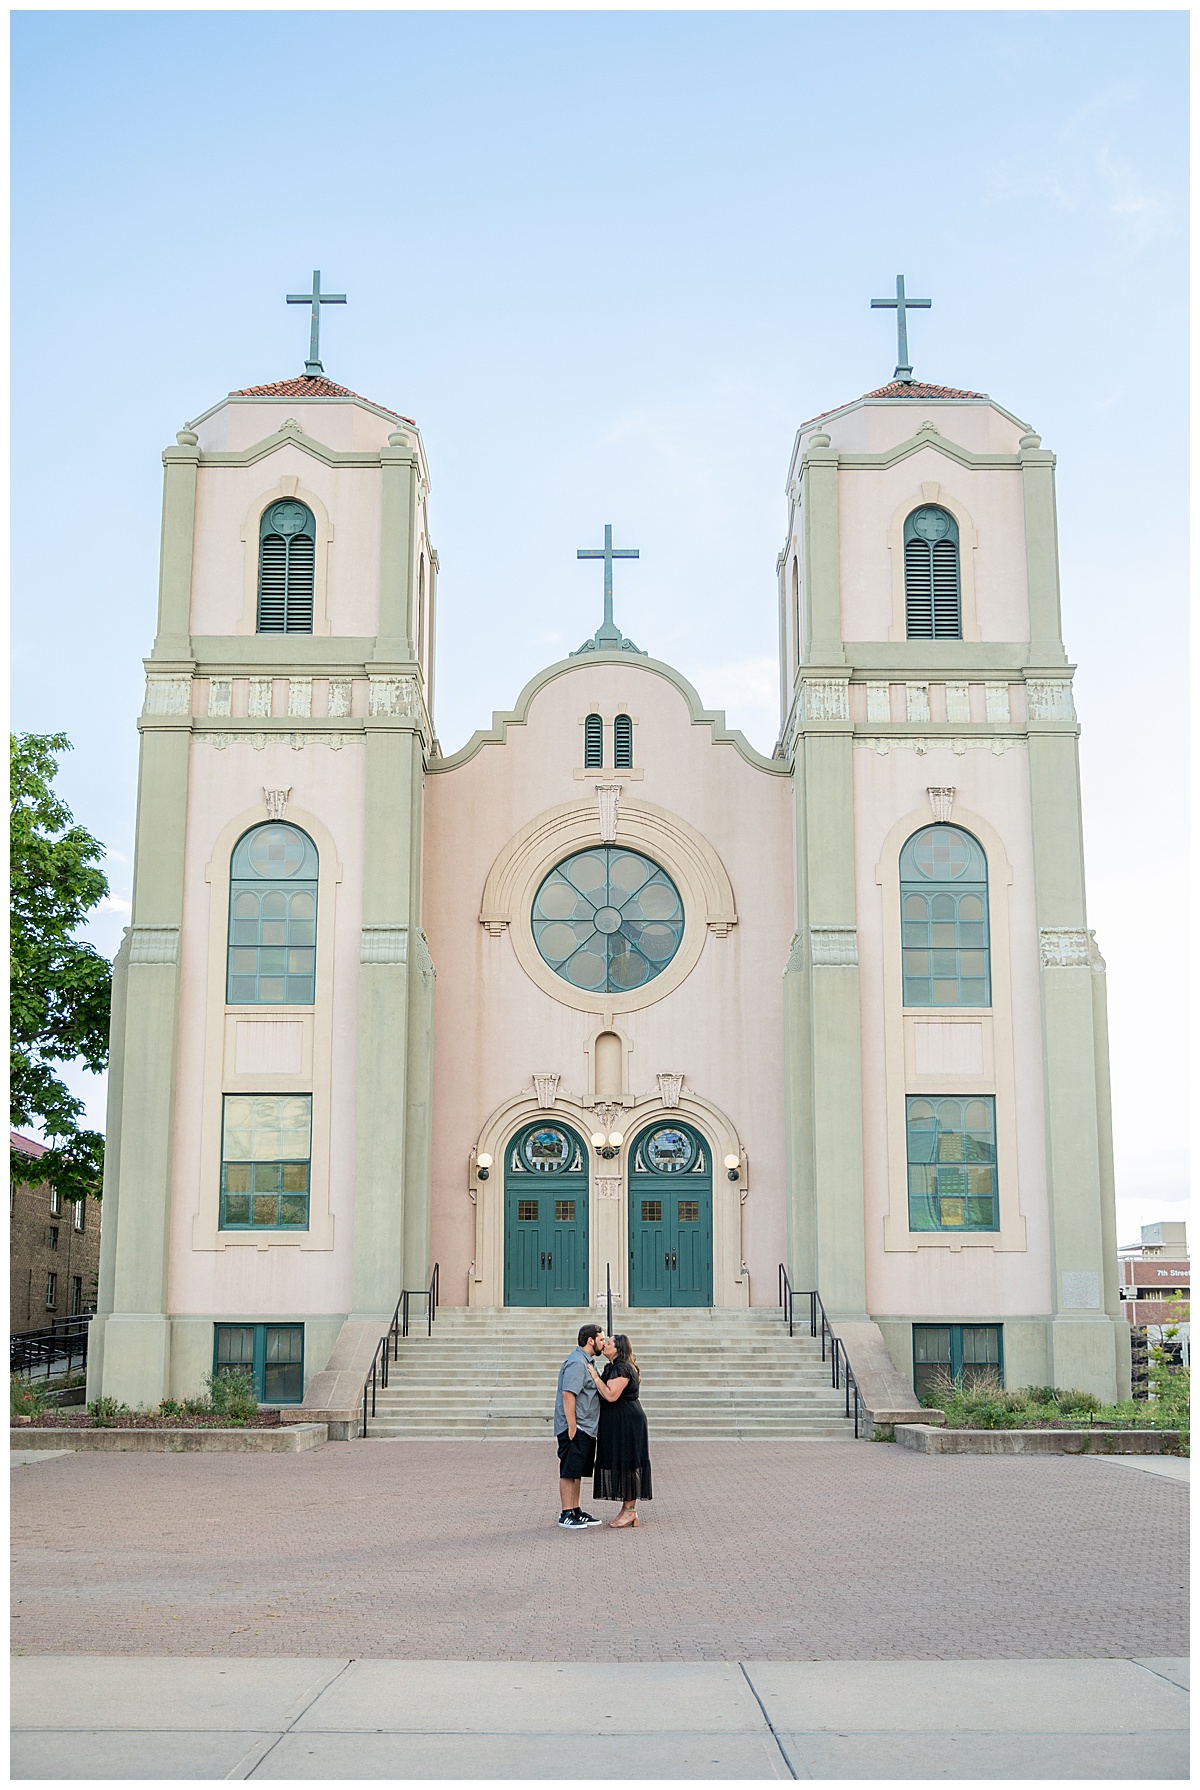 A couple in black and gray pose in front of an old pink and green church